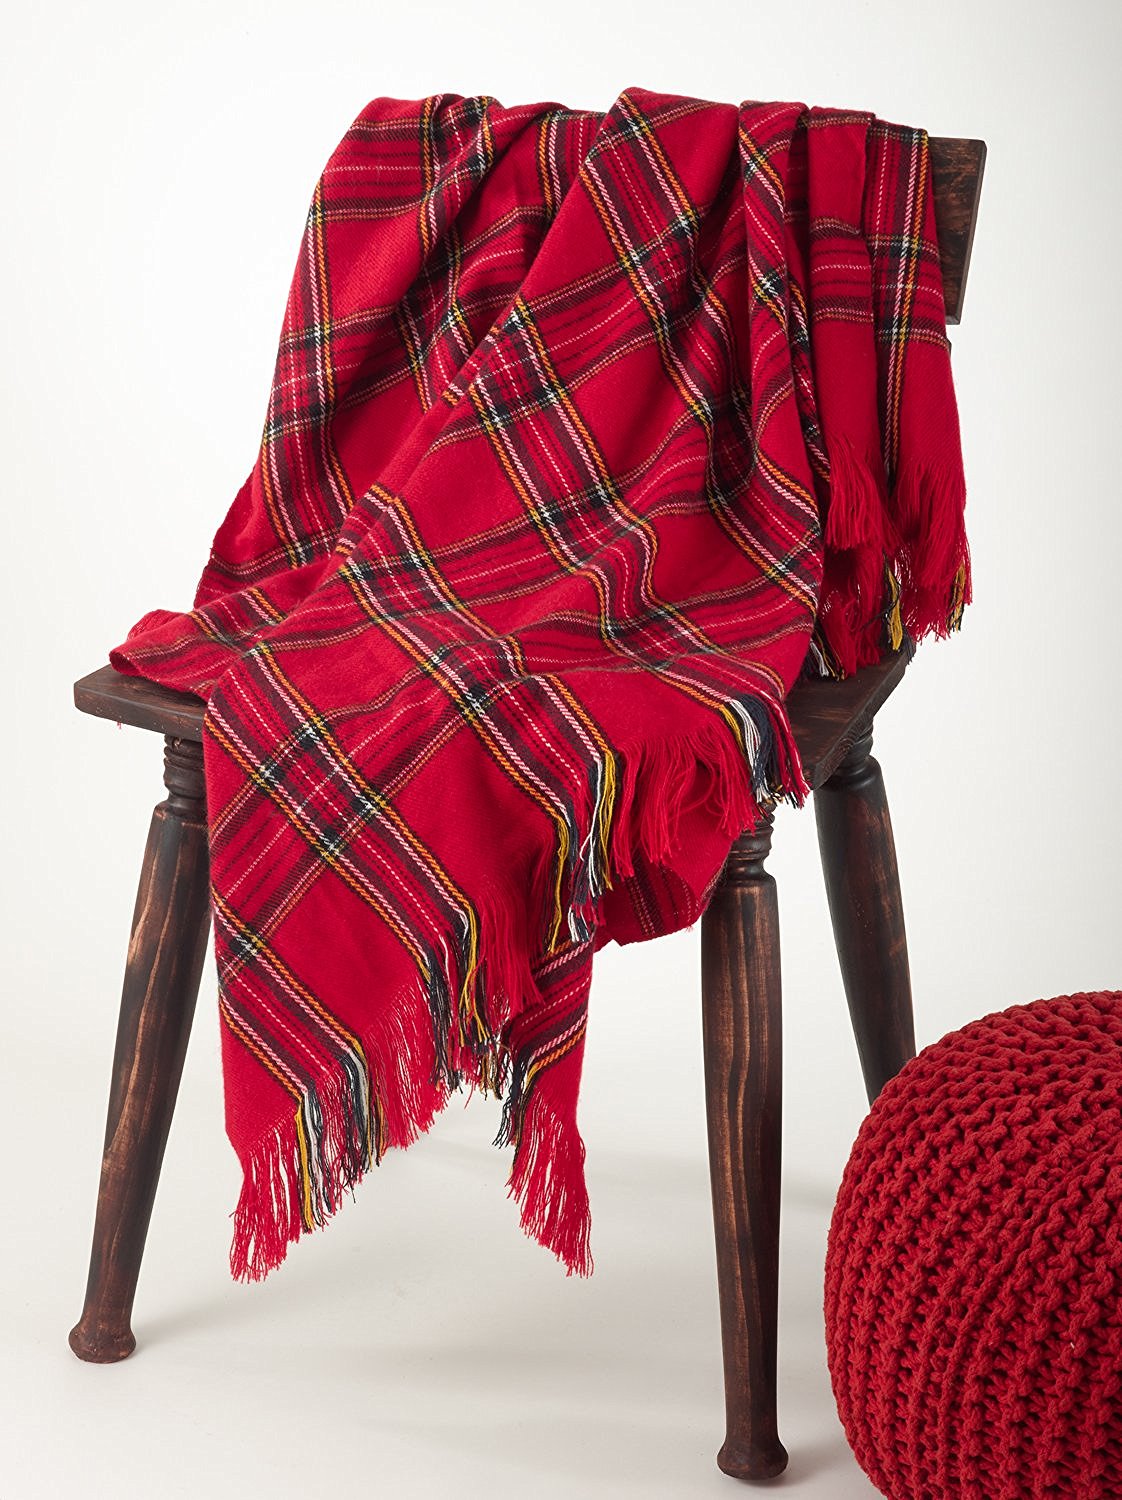 You'll love this stunning classic red plaid throw from Overstock it's the perfect way to add some warmth to your decor this fall and winter affiliate link